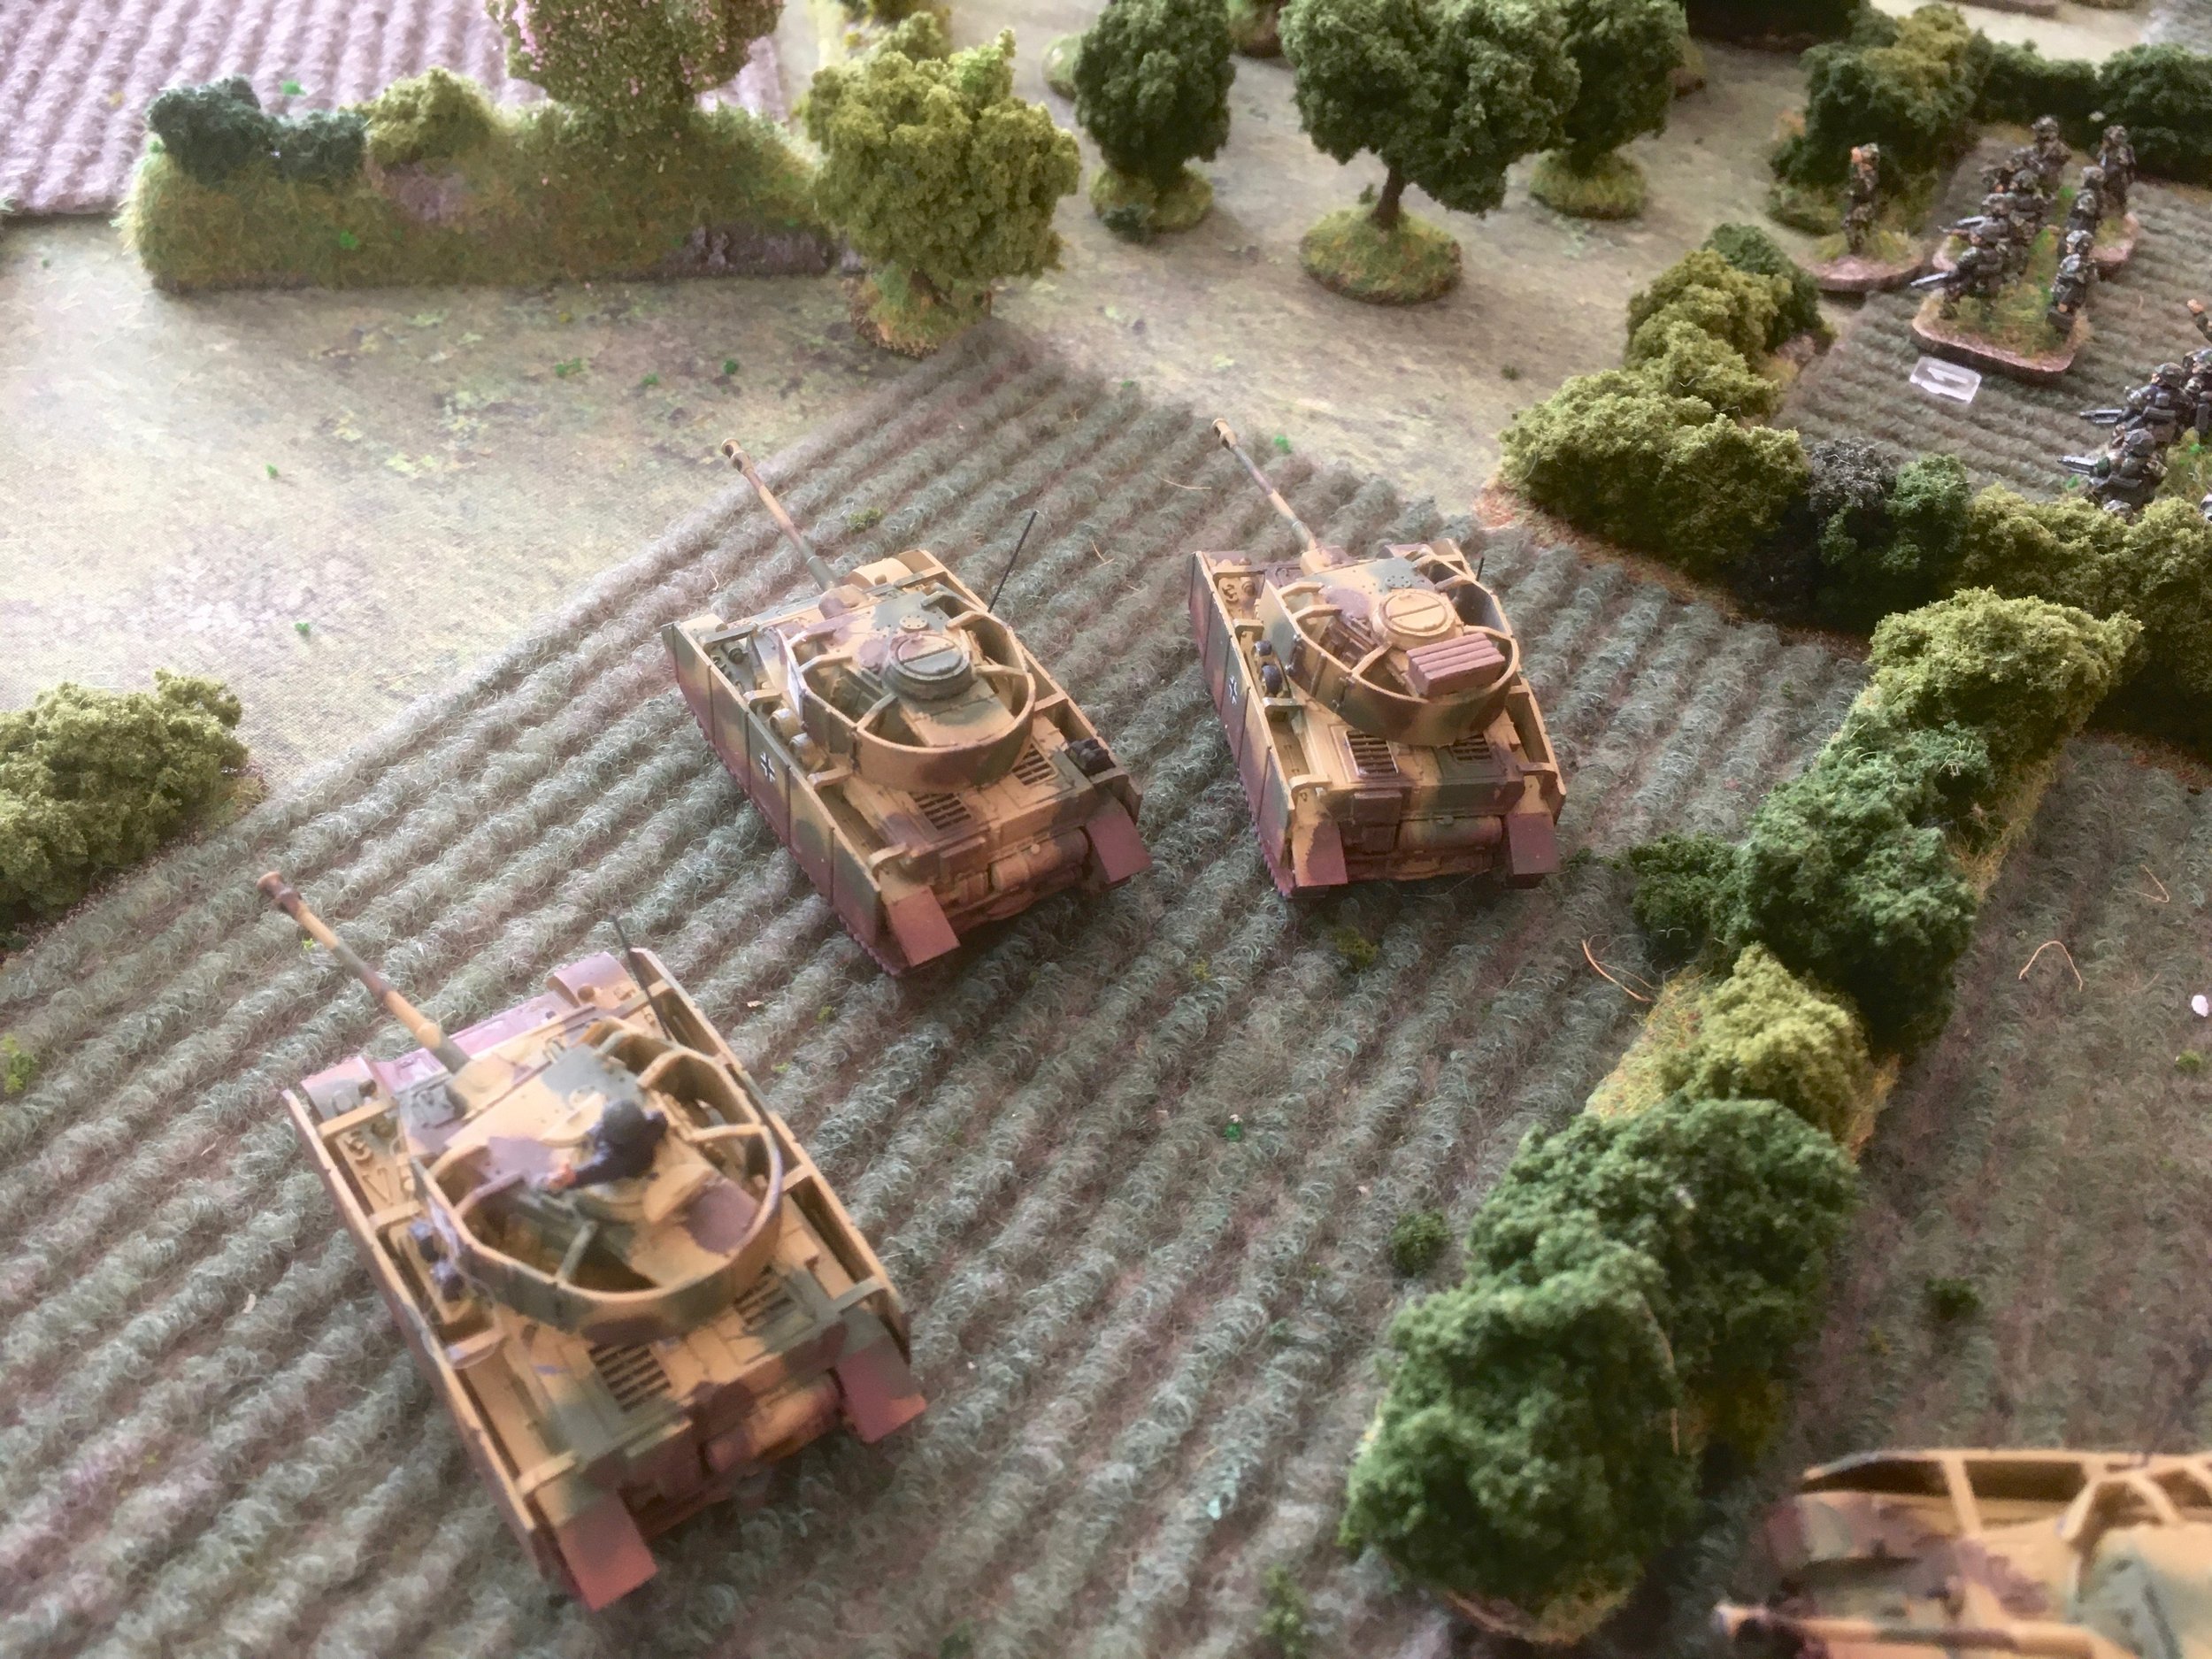 Jenny was the Panzer commander, deploying a platoon of Panzer IV's on the German left flank.